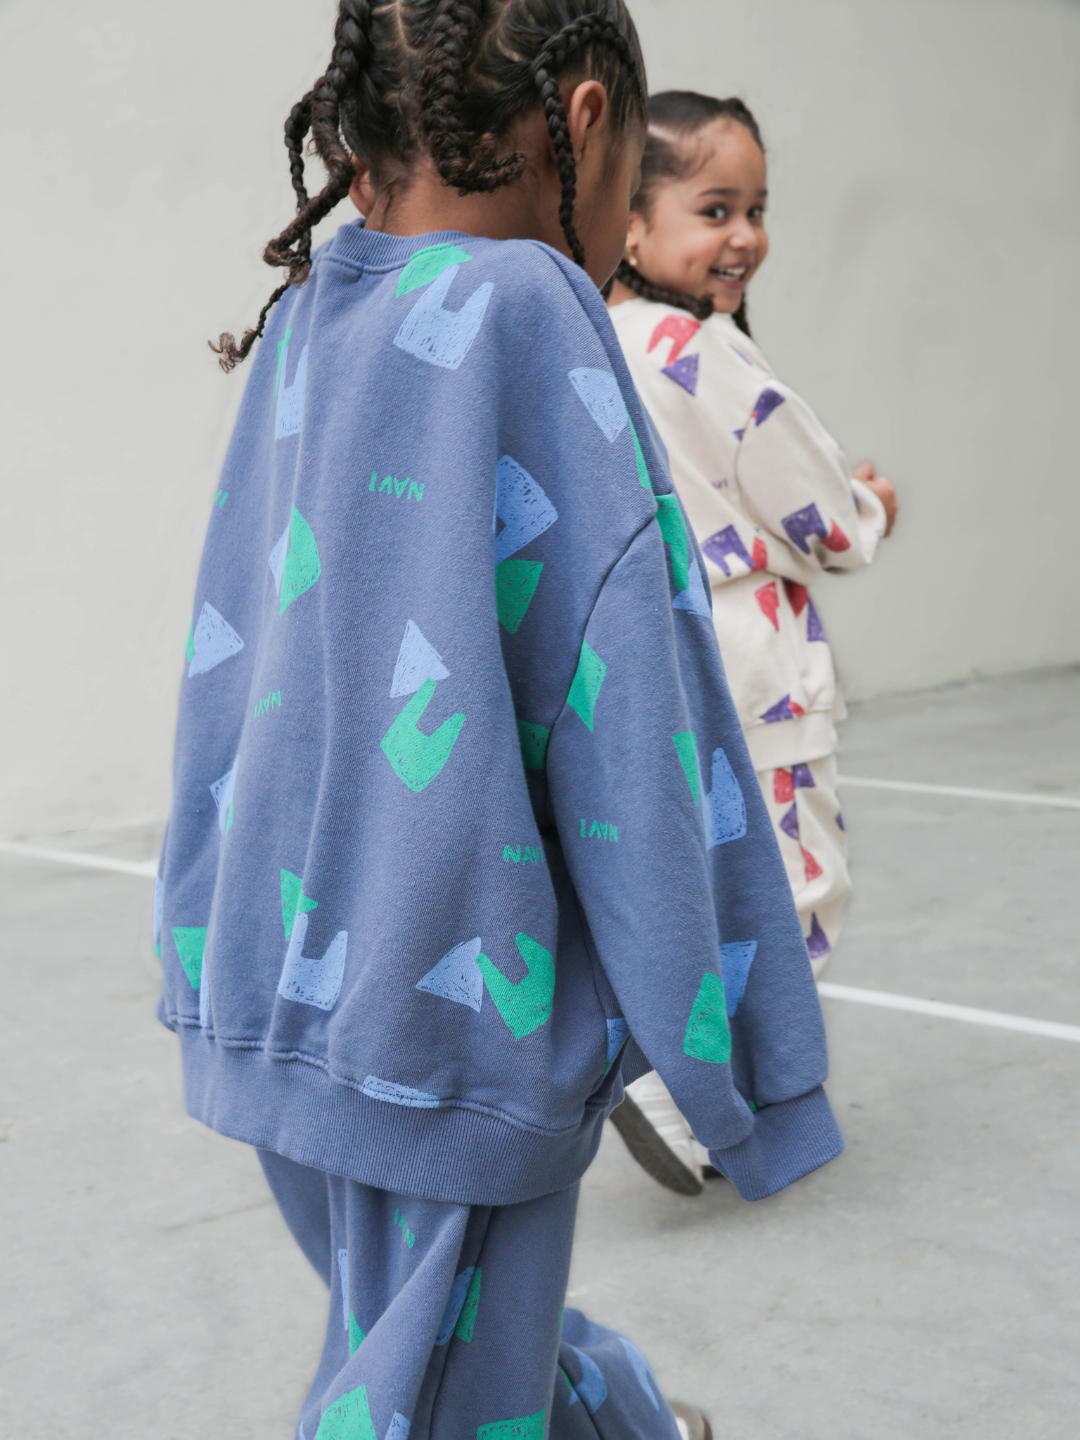 Child wearing blue crewneck sweatshirt with an all over pattern of green and blue shapes and the brand name Navi, with matching sweatpants.He is walking in front of a grey background.